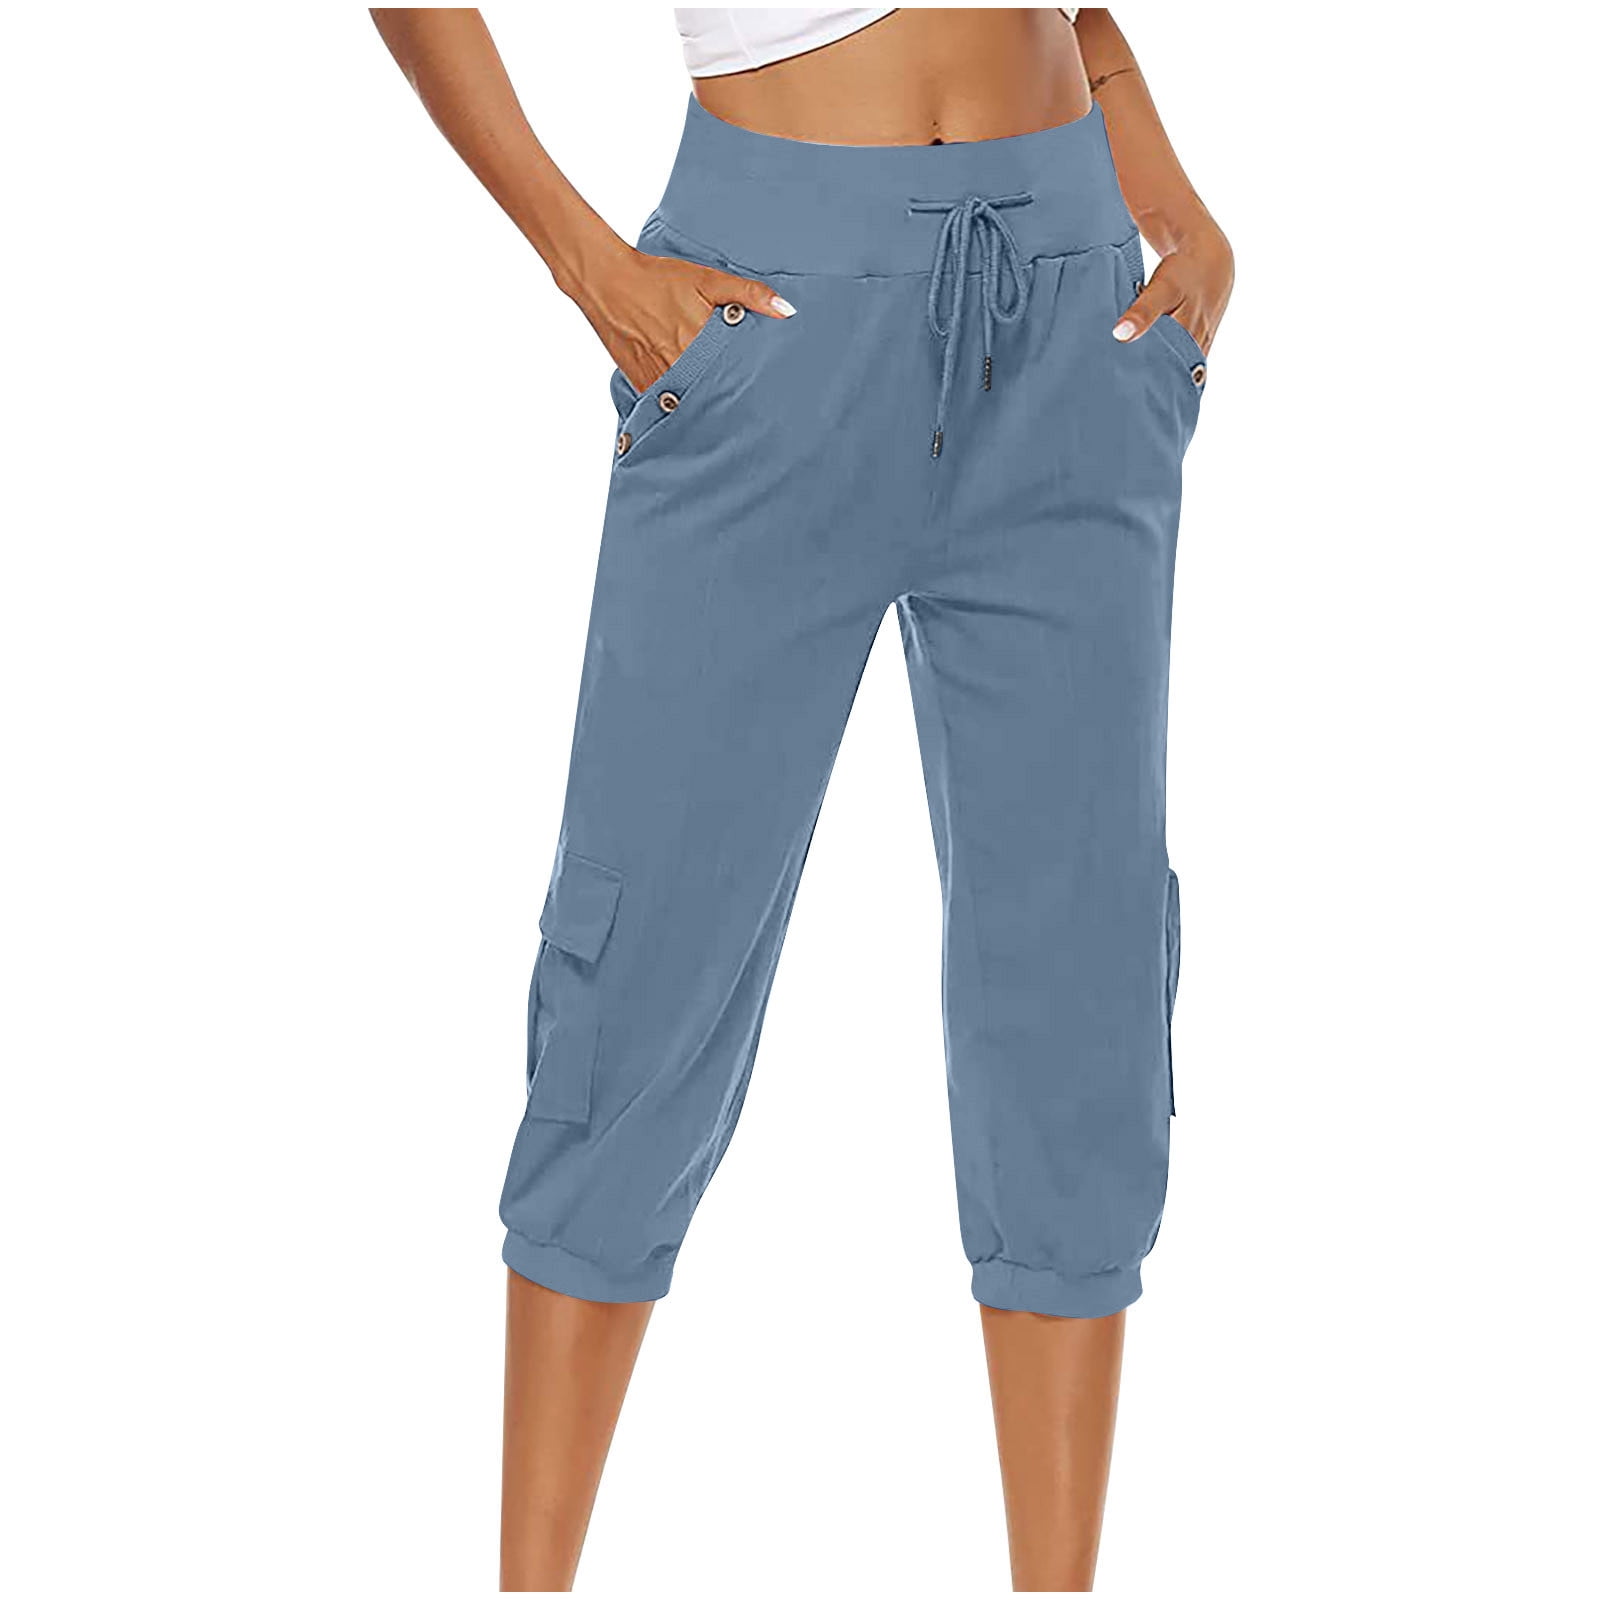 Naughtyhood Pants for Women Casual Summer Fashion Lightweight Stretch  Skimmer Pants Drawstring Pant Plus Size Activewear Clearance 